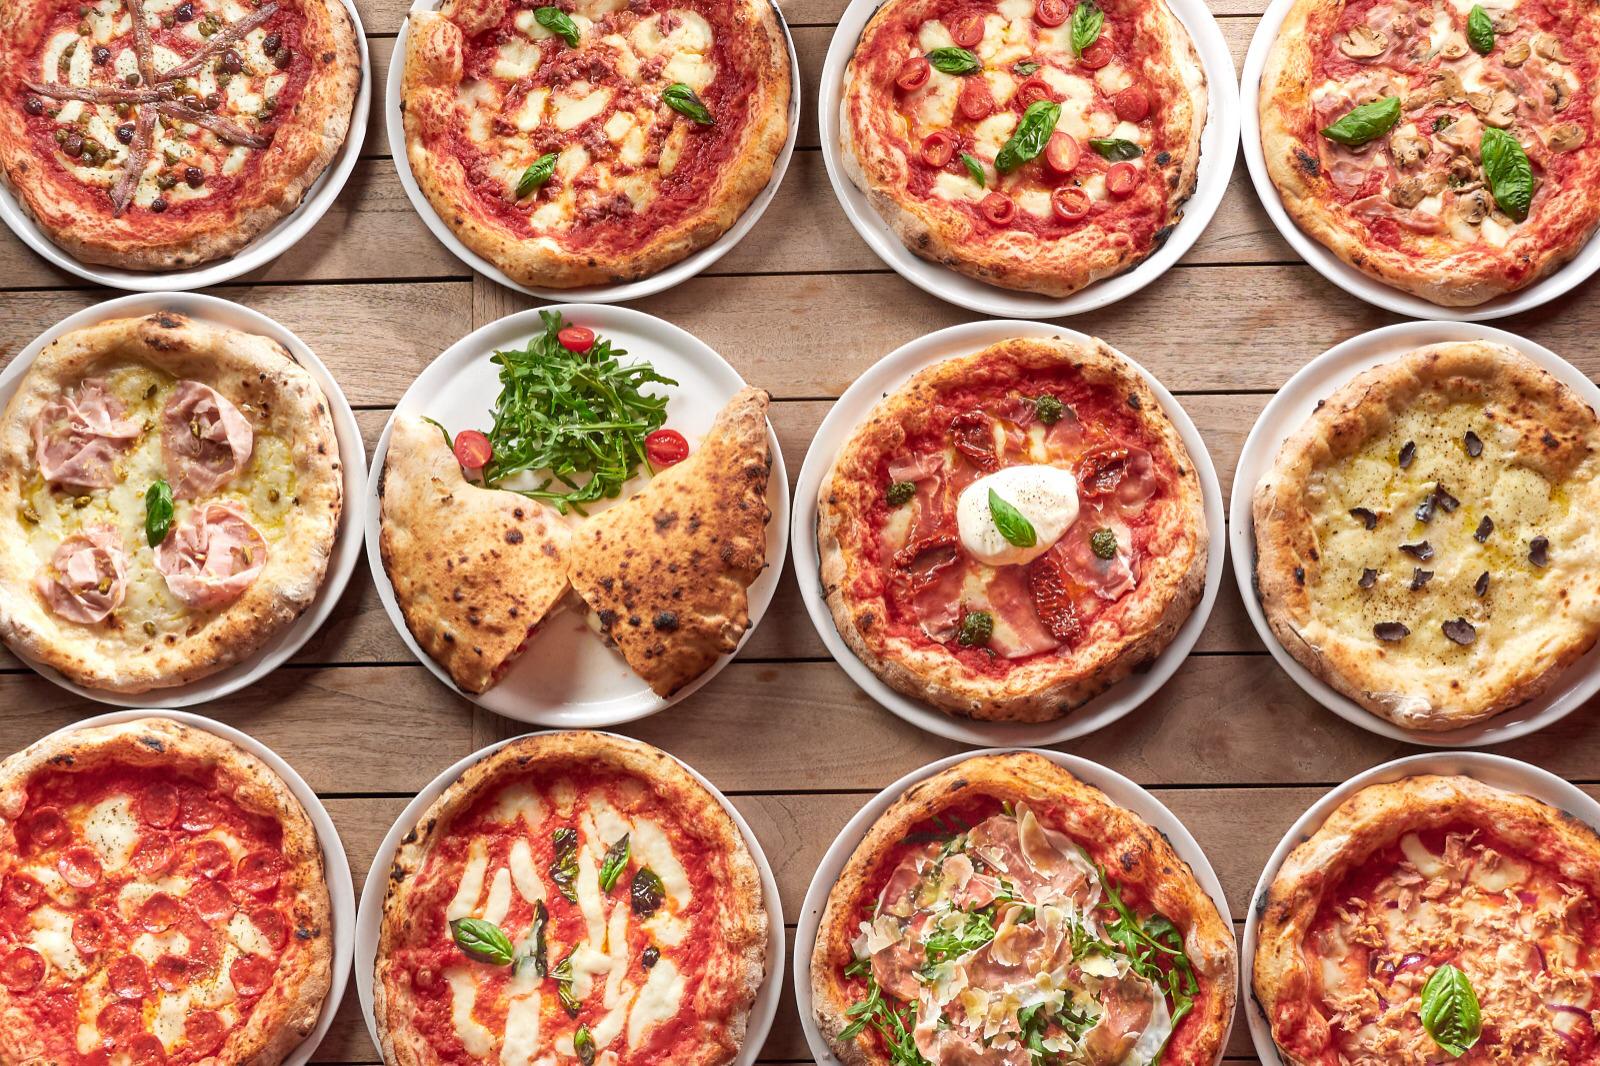 The Best Pizzas In Hong Kong 2021